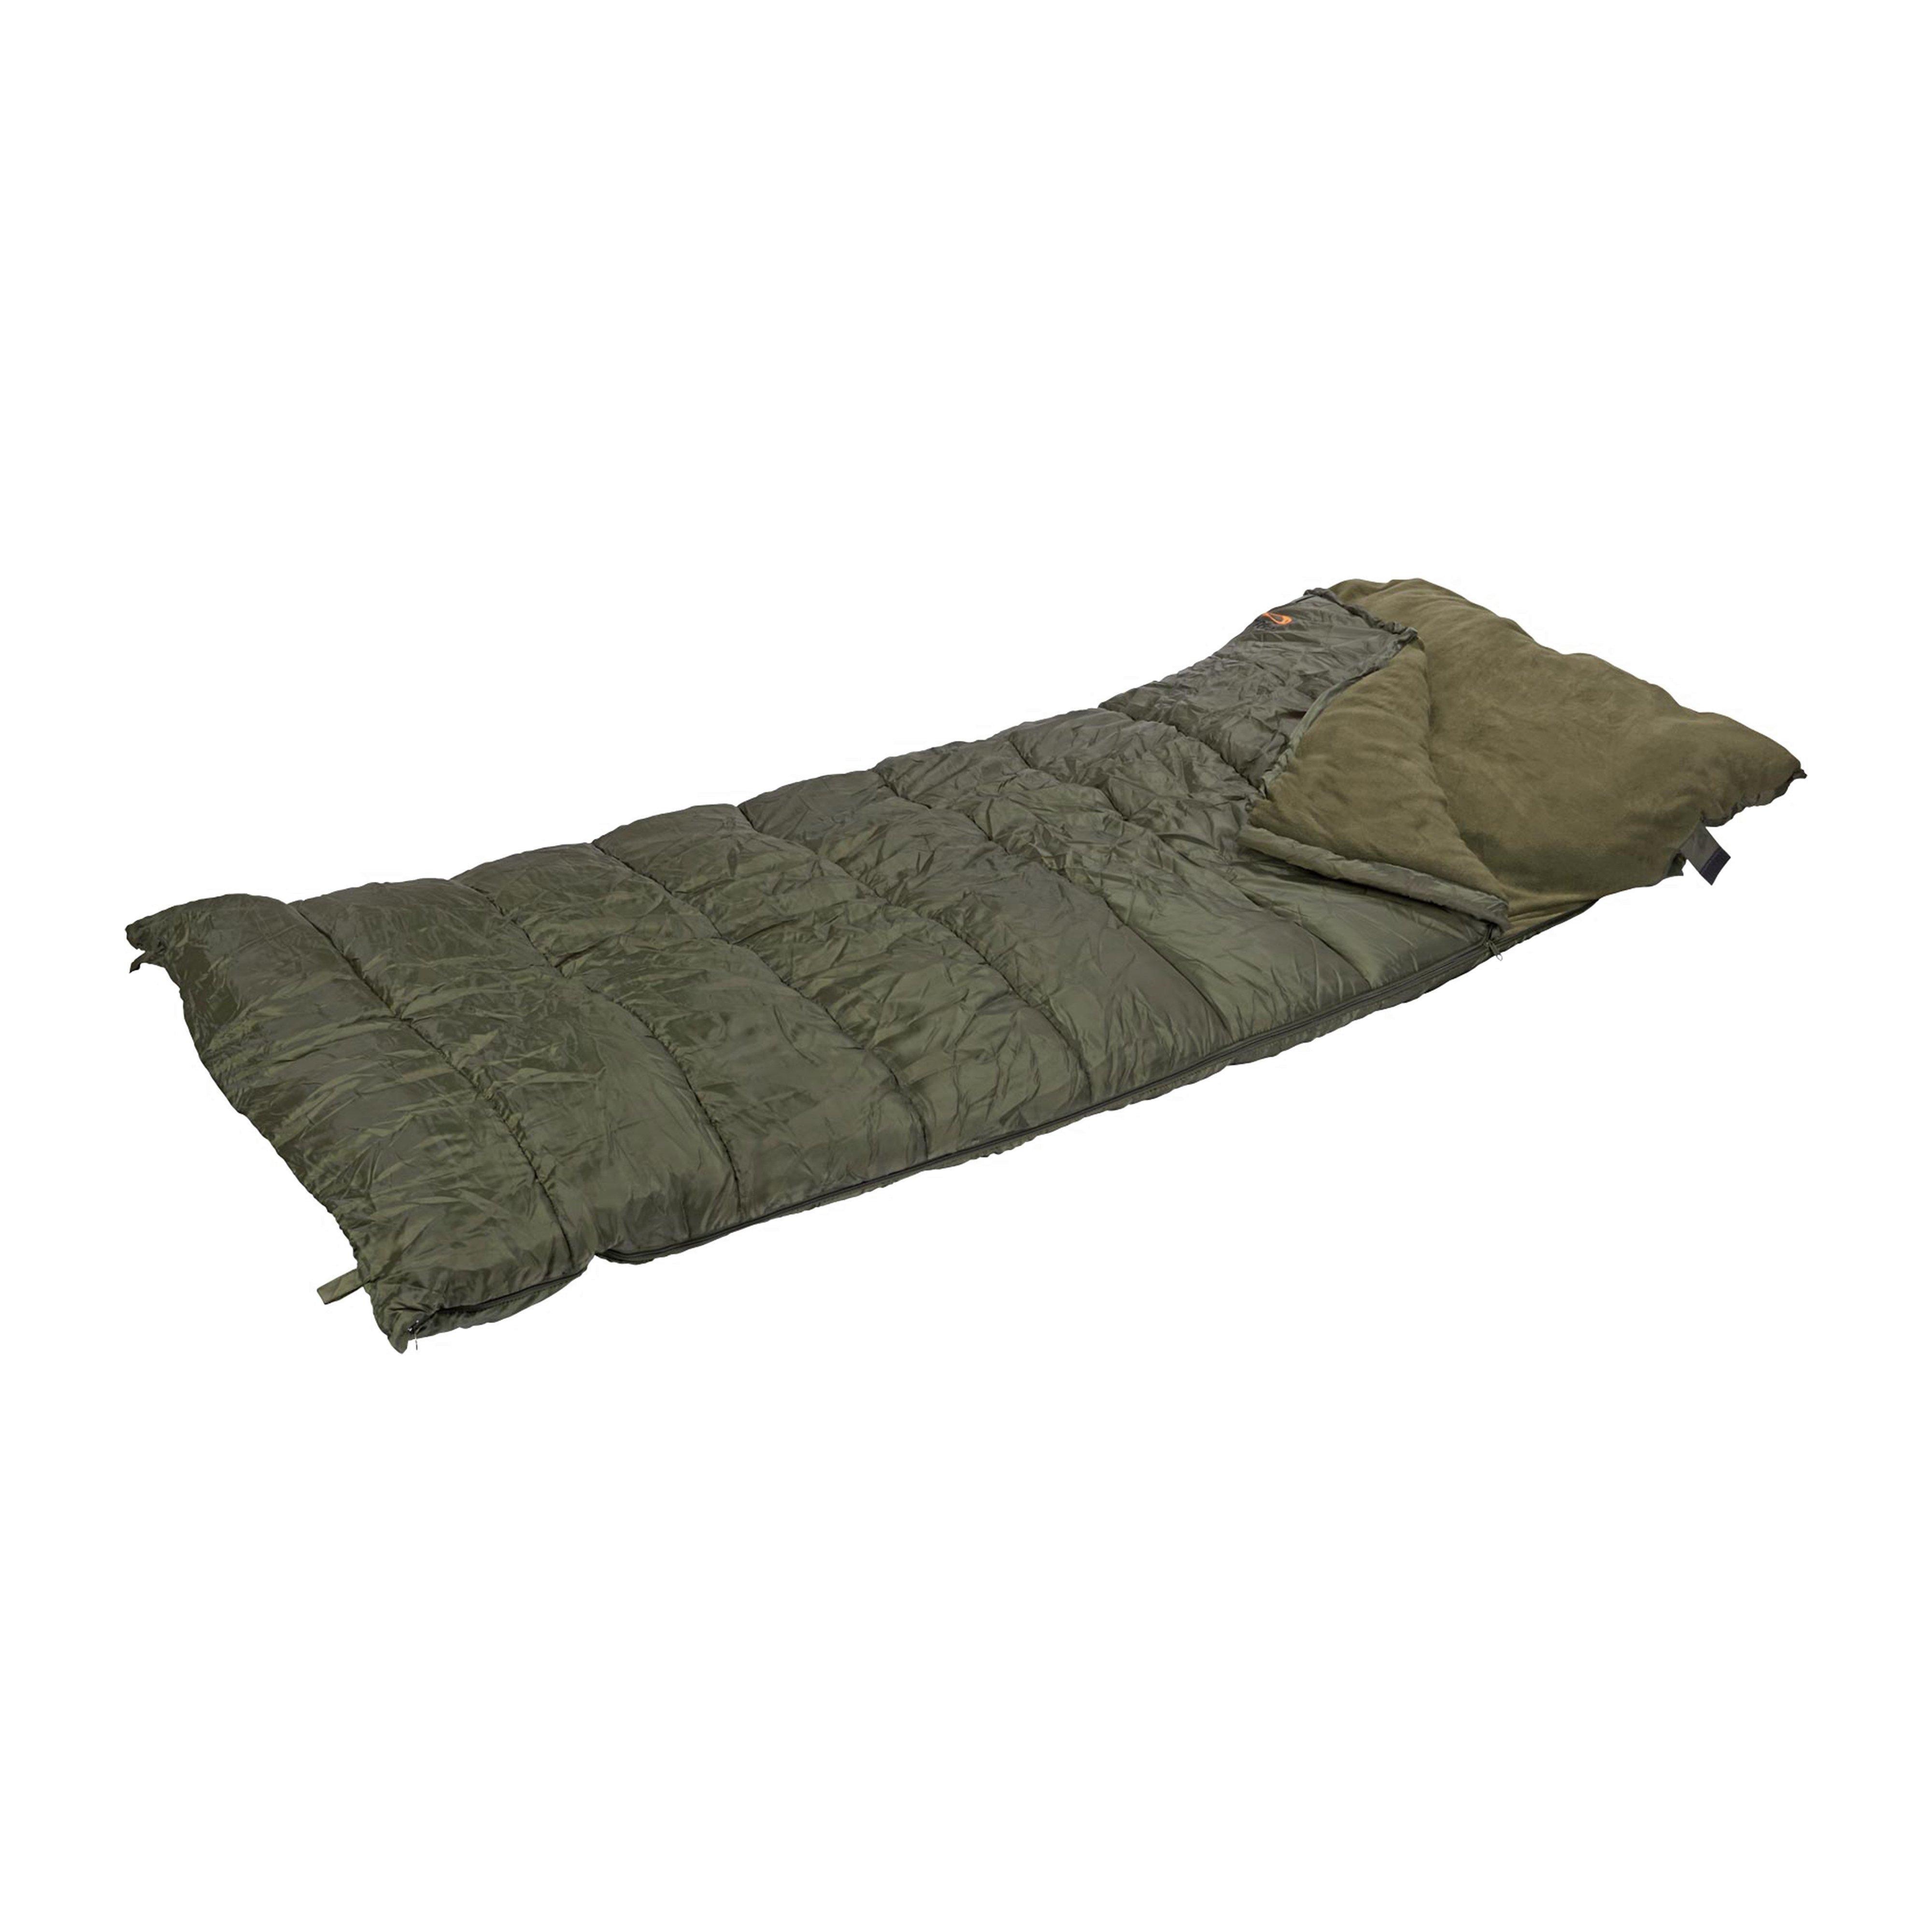 TFGear Chill Out 4 Season Sleeping Bag (Standard) Review